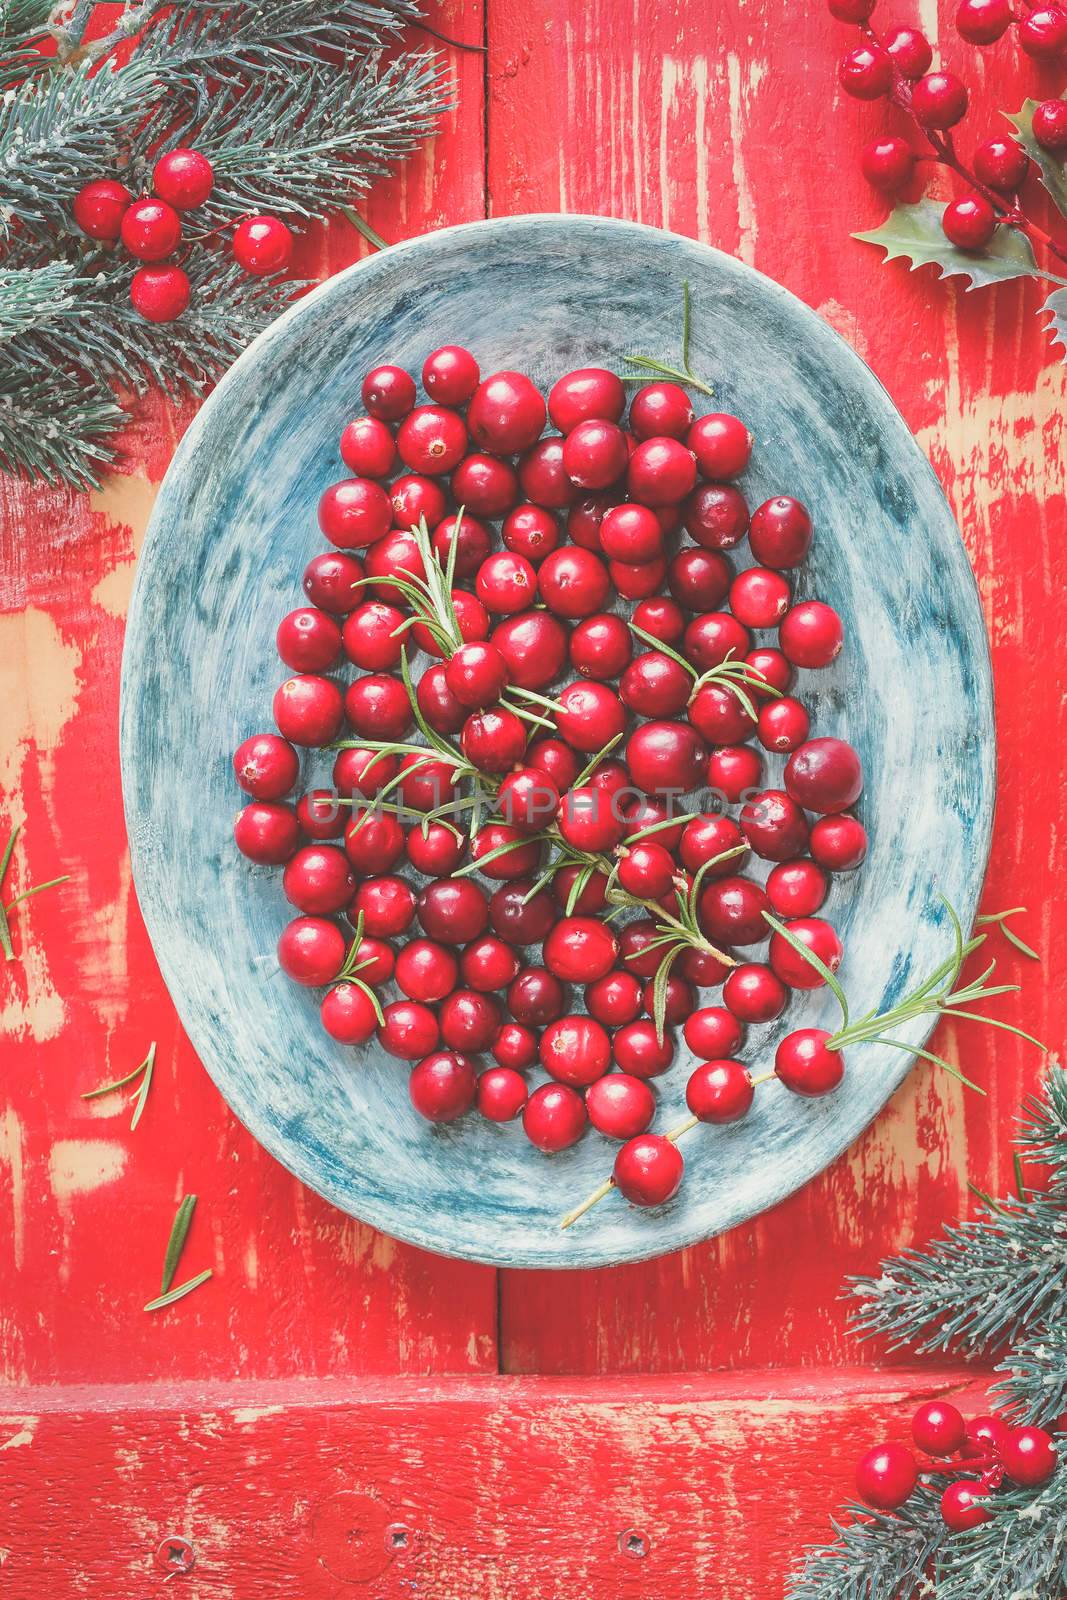 Cranberries on a plate by Slast20